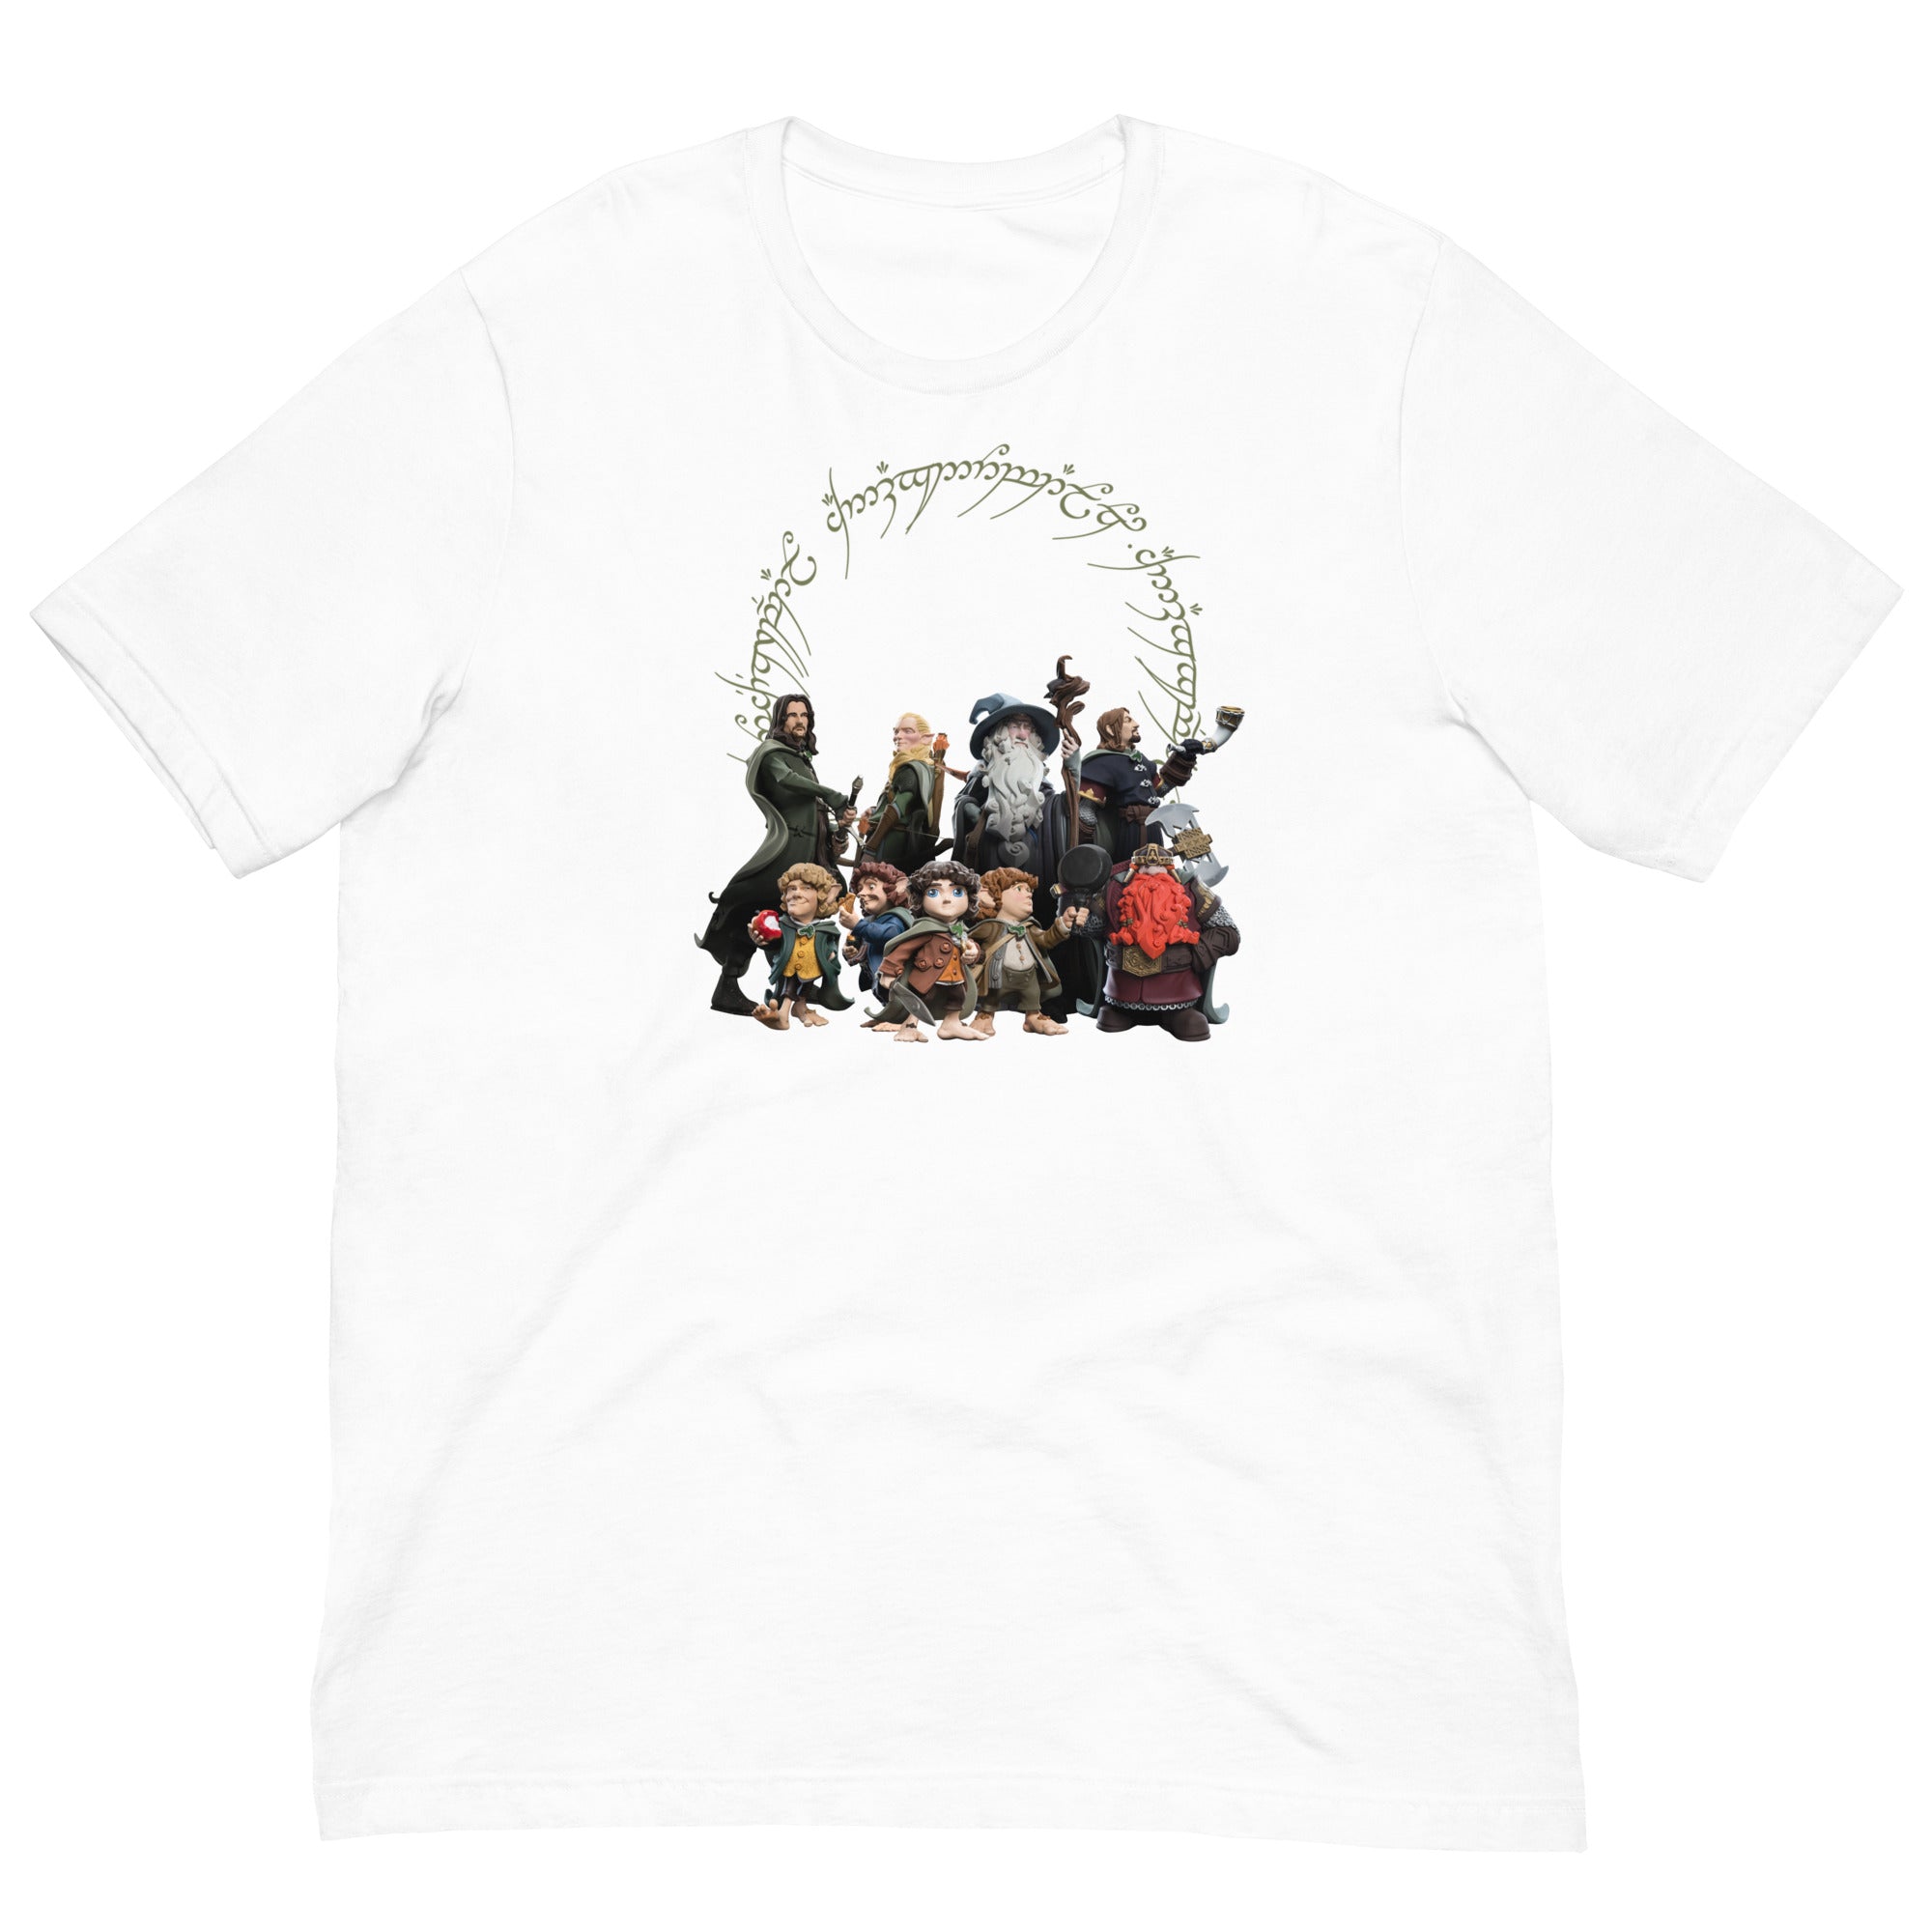 The Lord of the Rings Character Ensemble T-Shirt